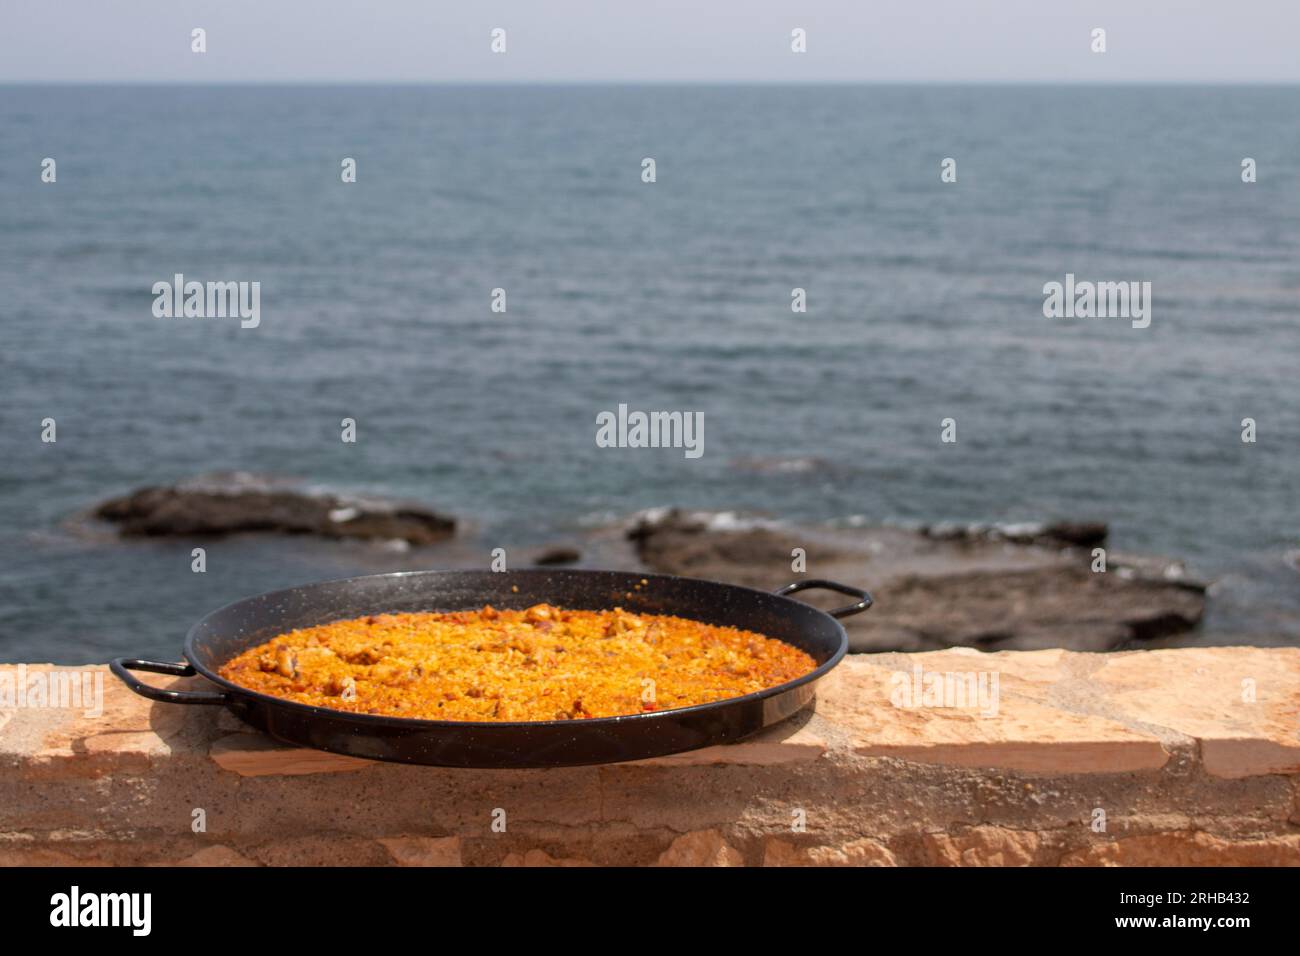 Serving a paella by the sea with the palette and hands Stock Photo